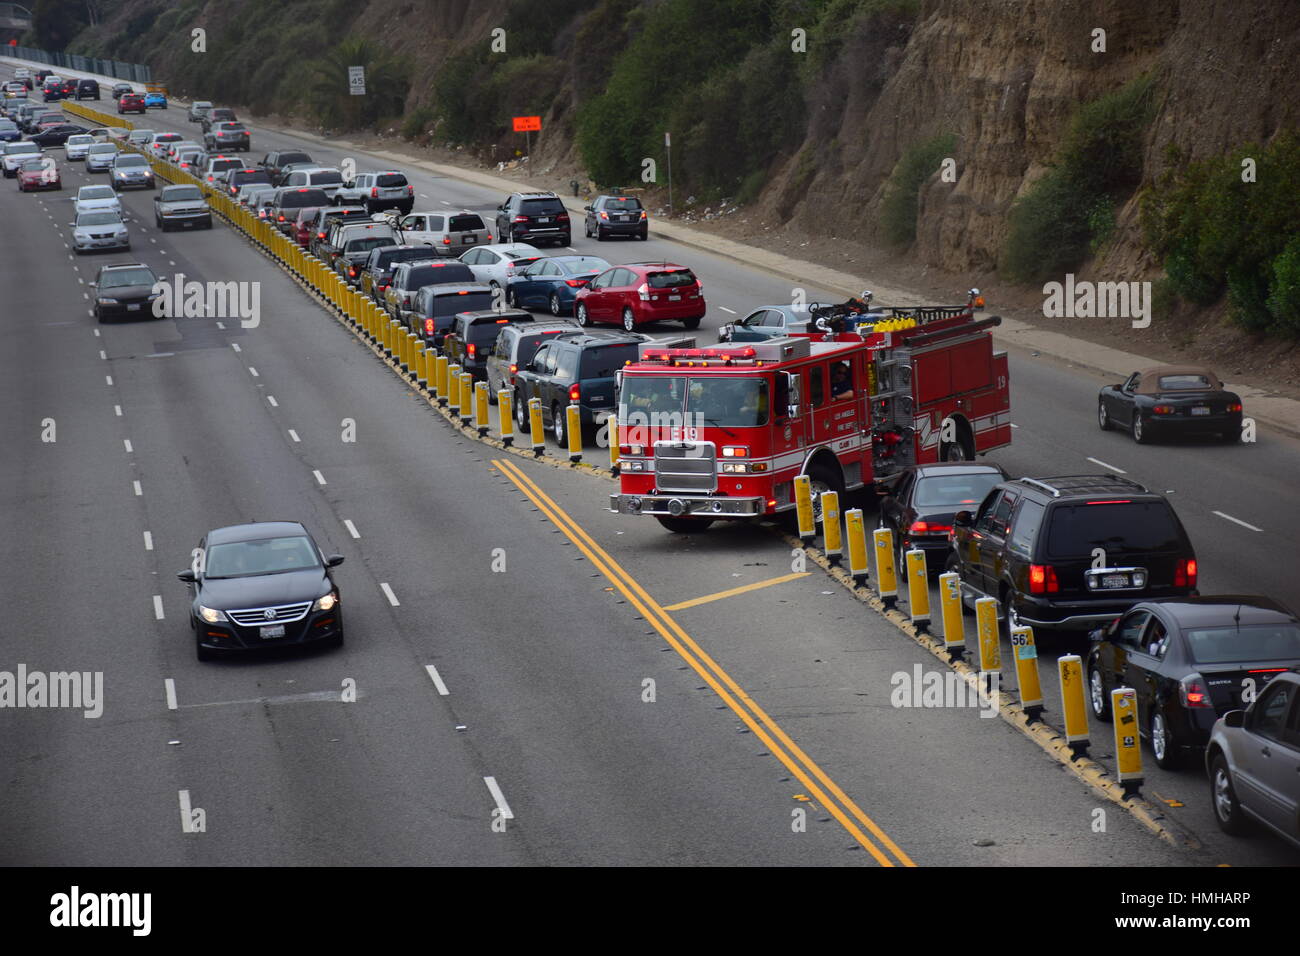 LA Fire Engine Plow Through Heavy Traffic and Turn Around to Switch Lane and Direction near a Cliff Stock Photo